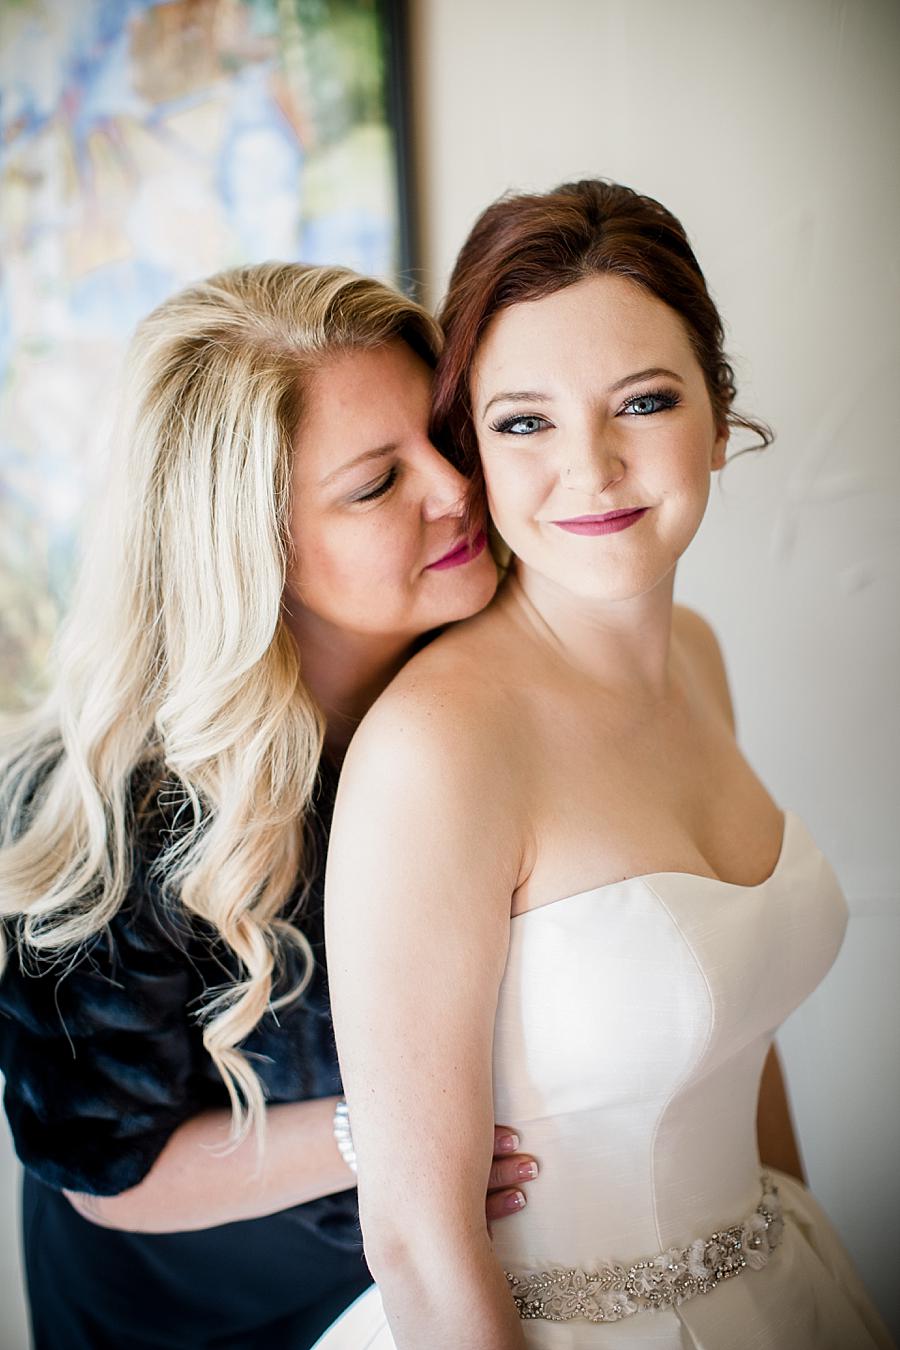 Snuggles with mom at this Colorado Destination Wedding by Knoxville Wedding Photographer, Amanda May Photos.